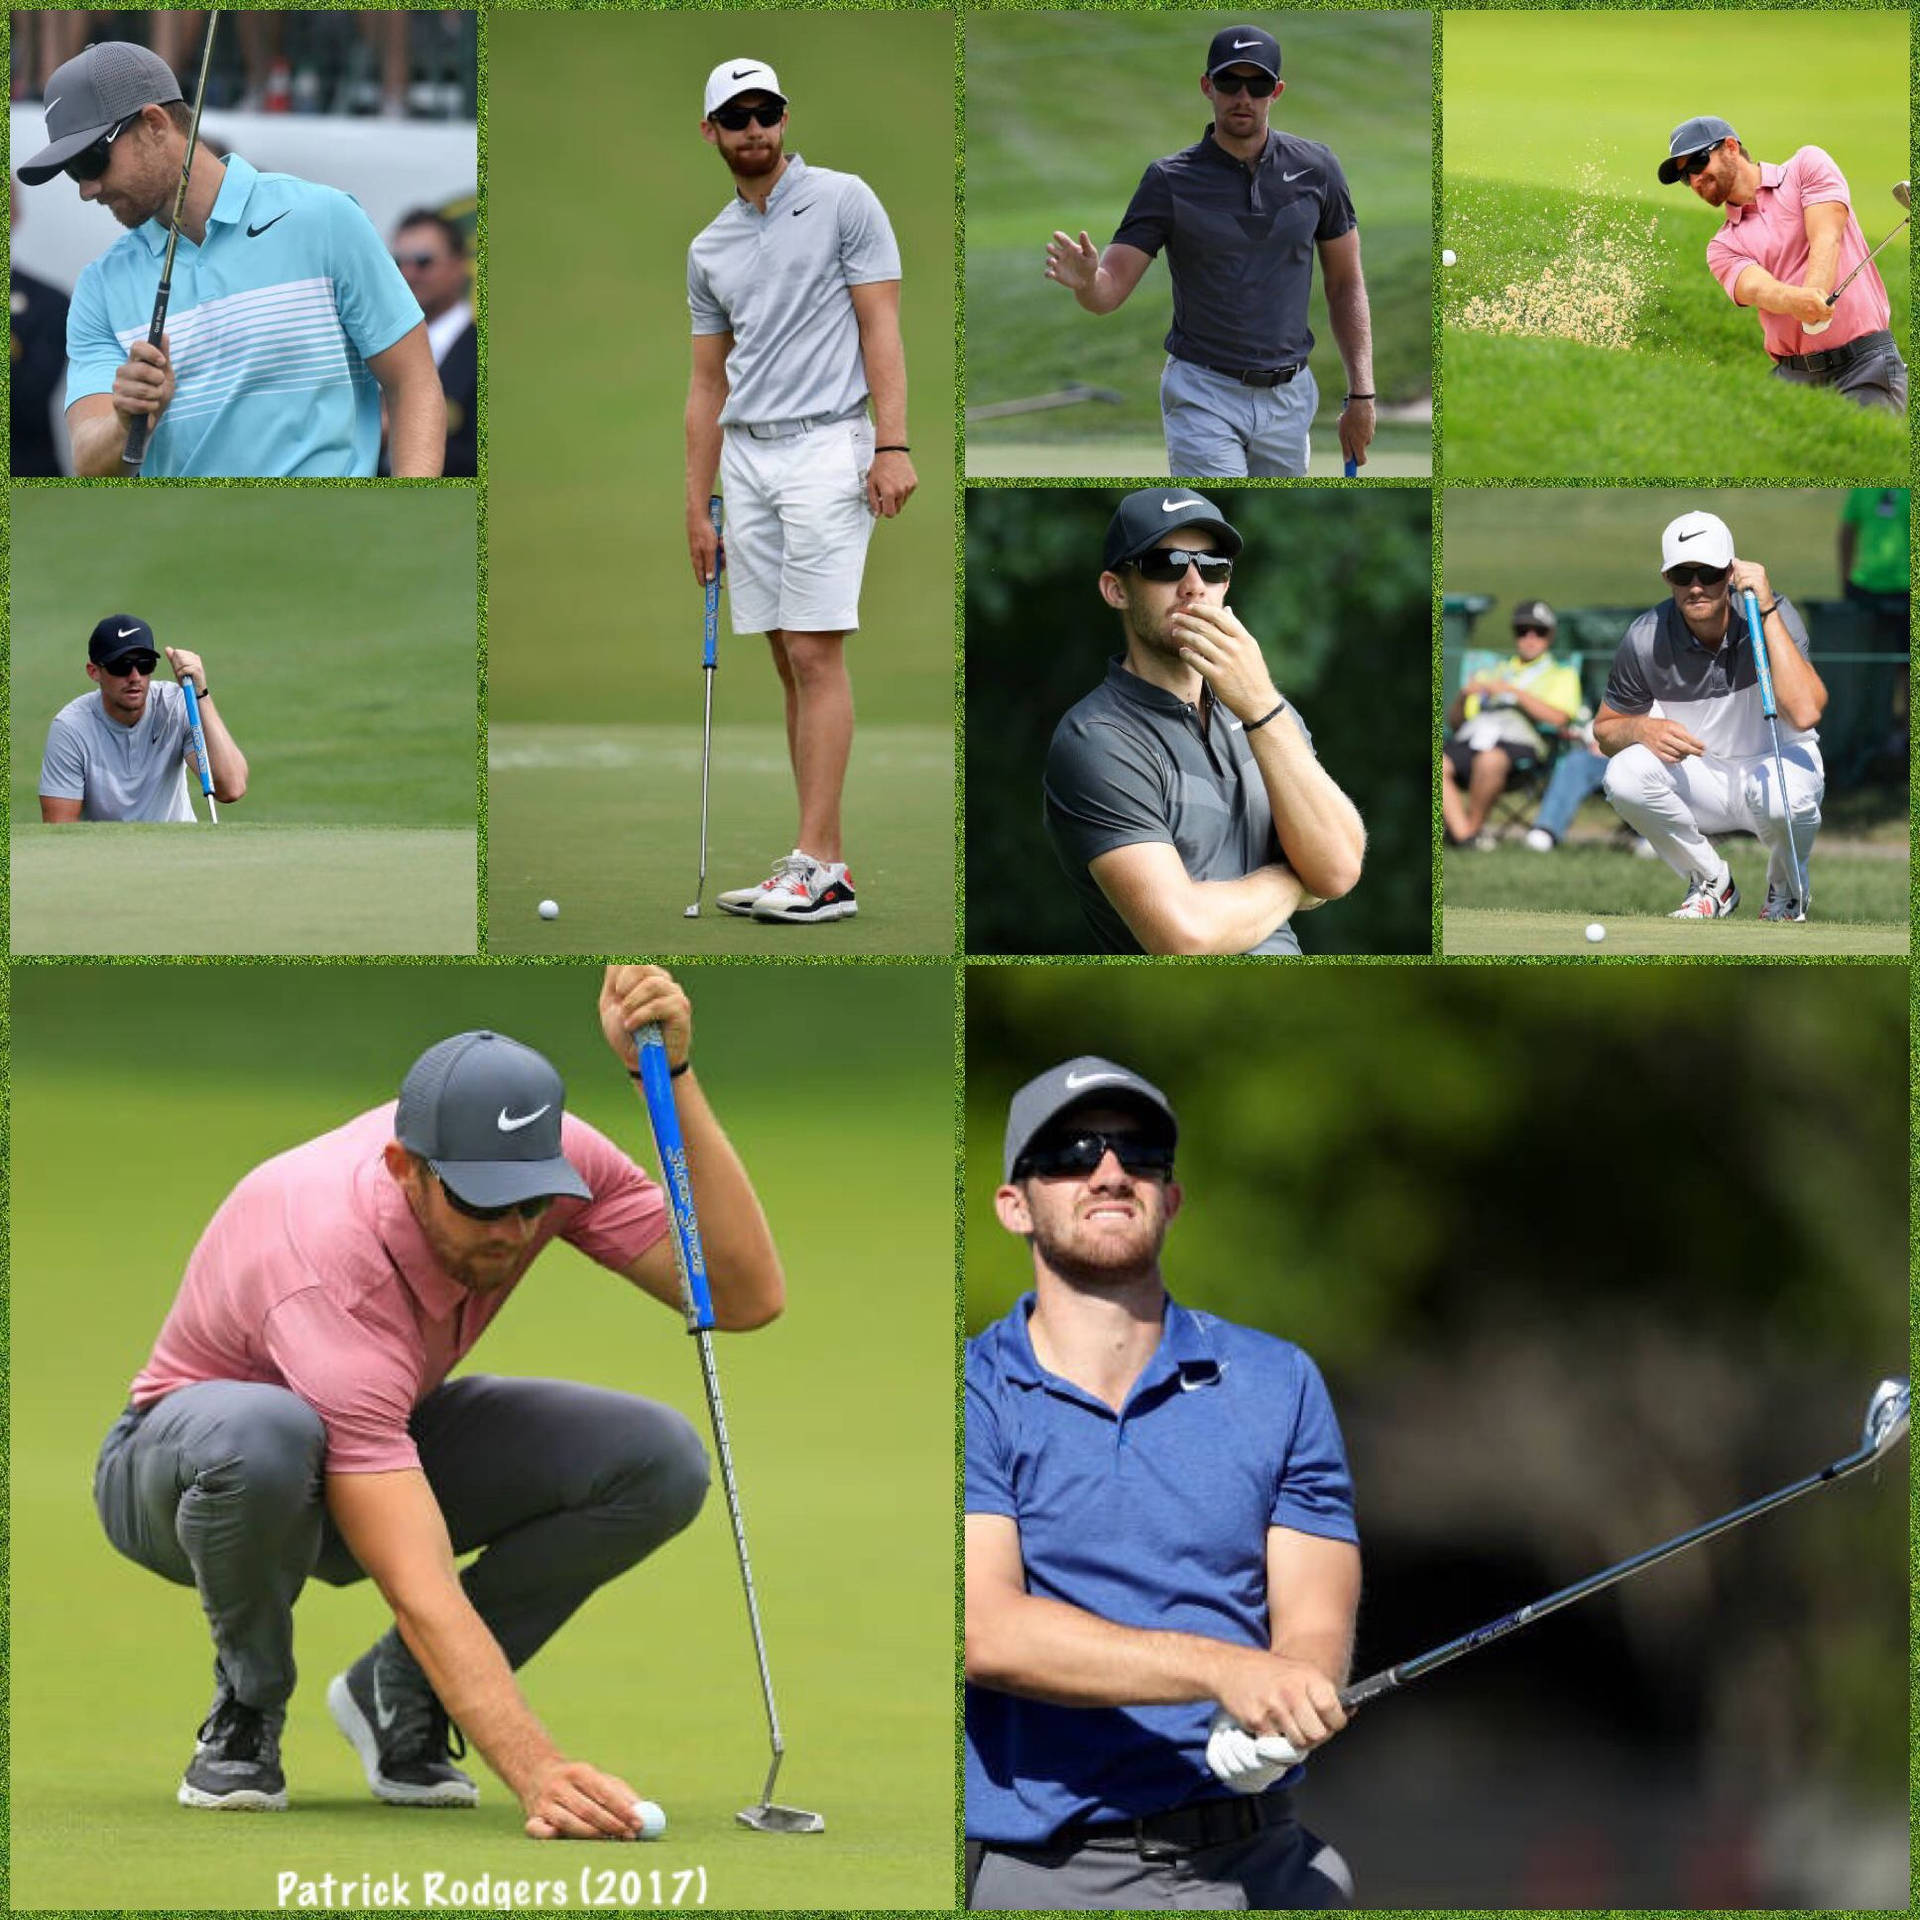 Exceptional Golfer Patrick Rodgers in Action Wallpaper